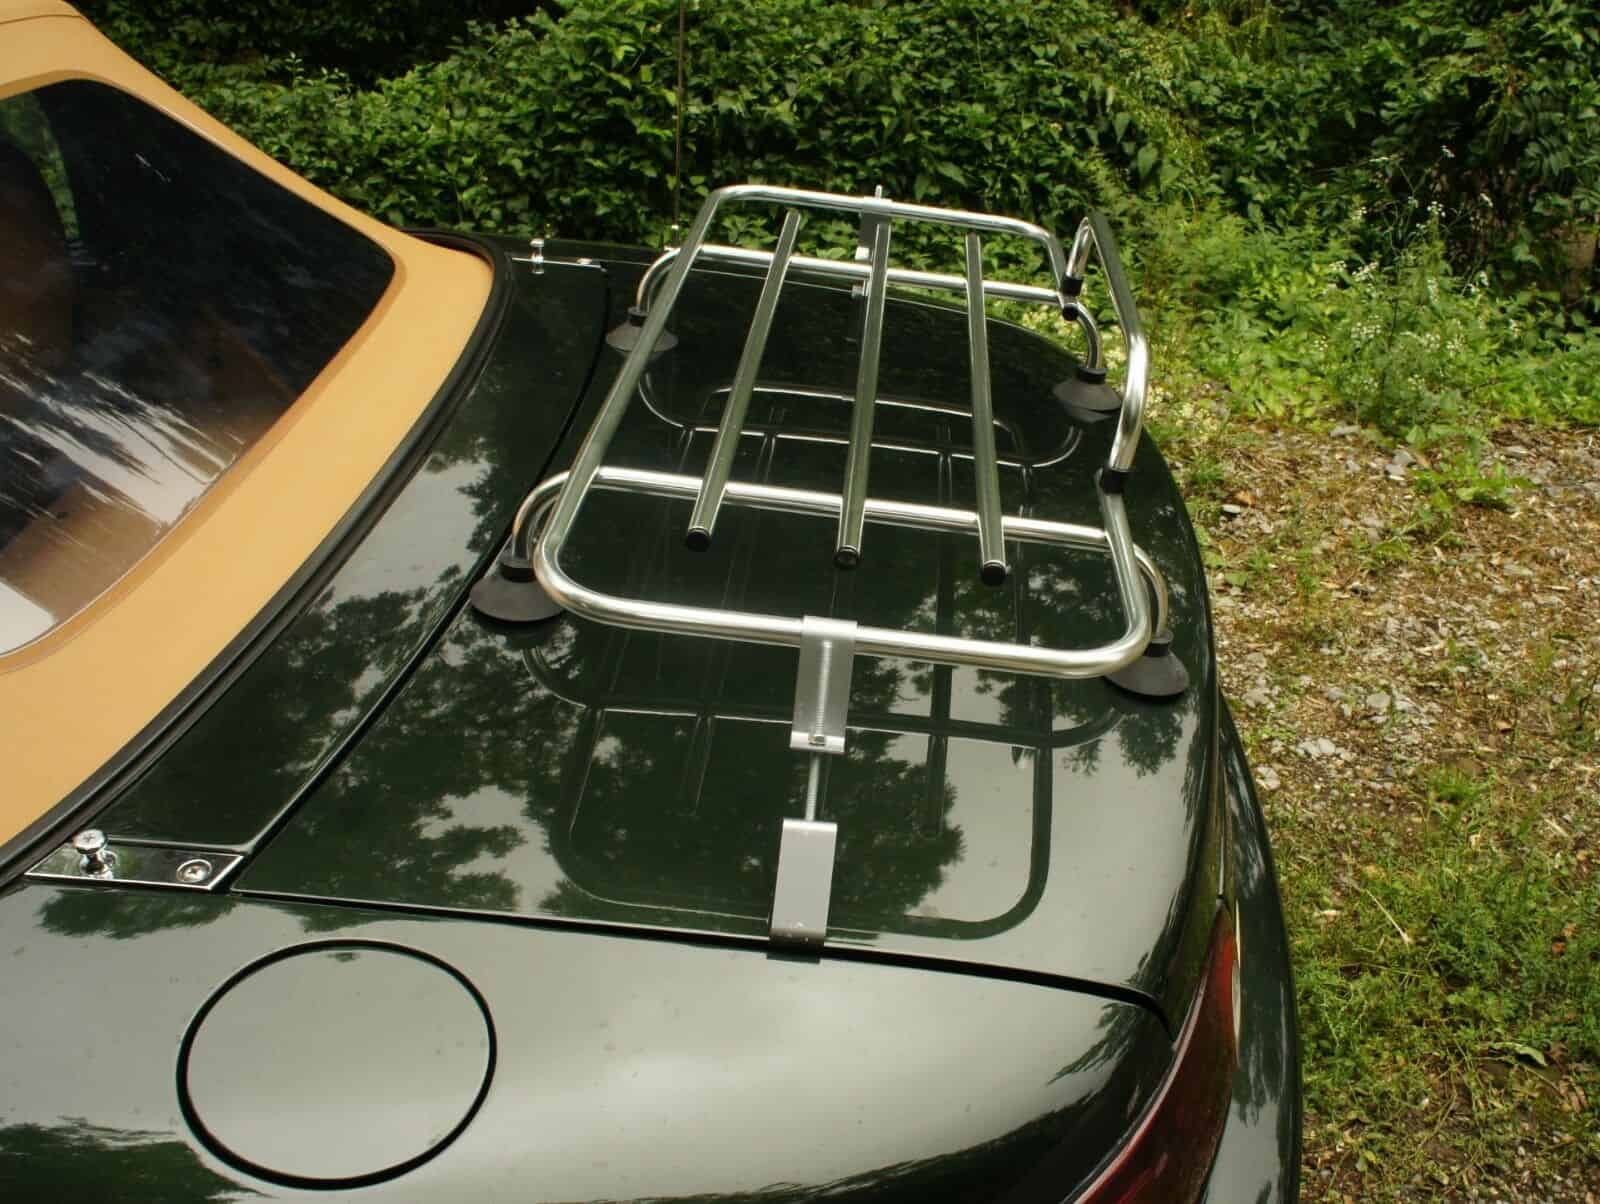 side view of a green mazda mx5 mk1 with a classic chrome luggage rack fitted in 1960's style